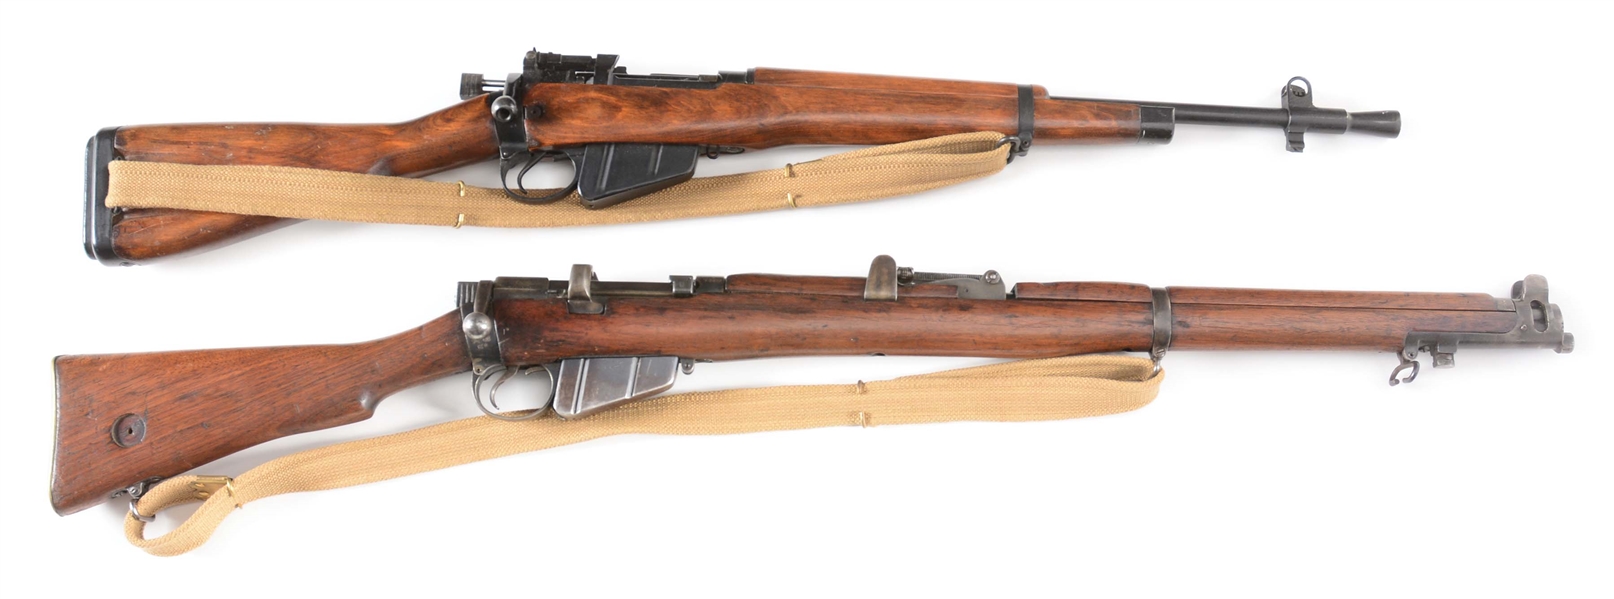 (C) LOT OF 2: BRITISH NO. 5 JUNGLE CARBINE AND NO. 1 MKIII BOLT ACTION RIFLES.